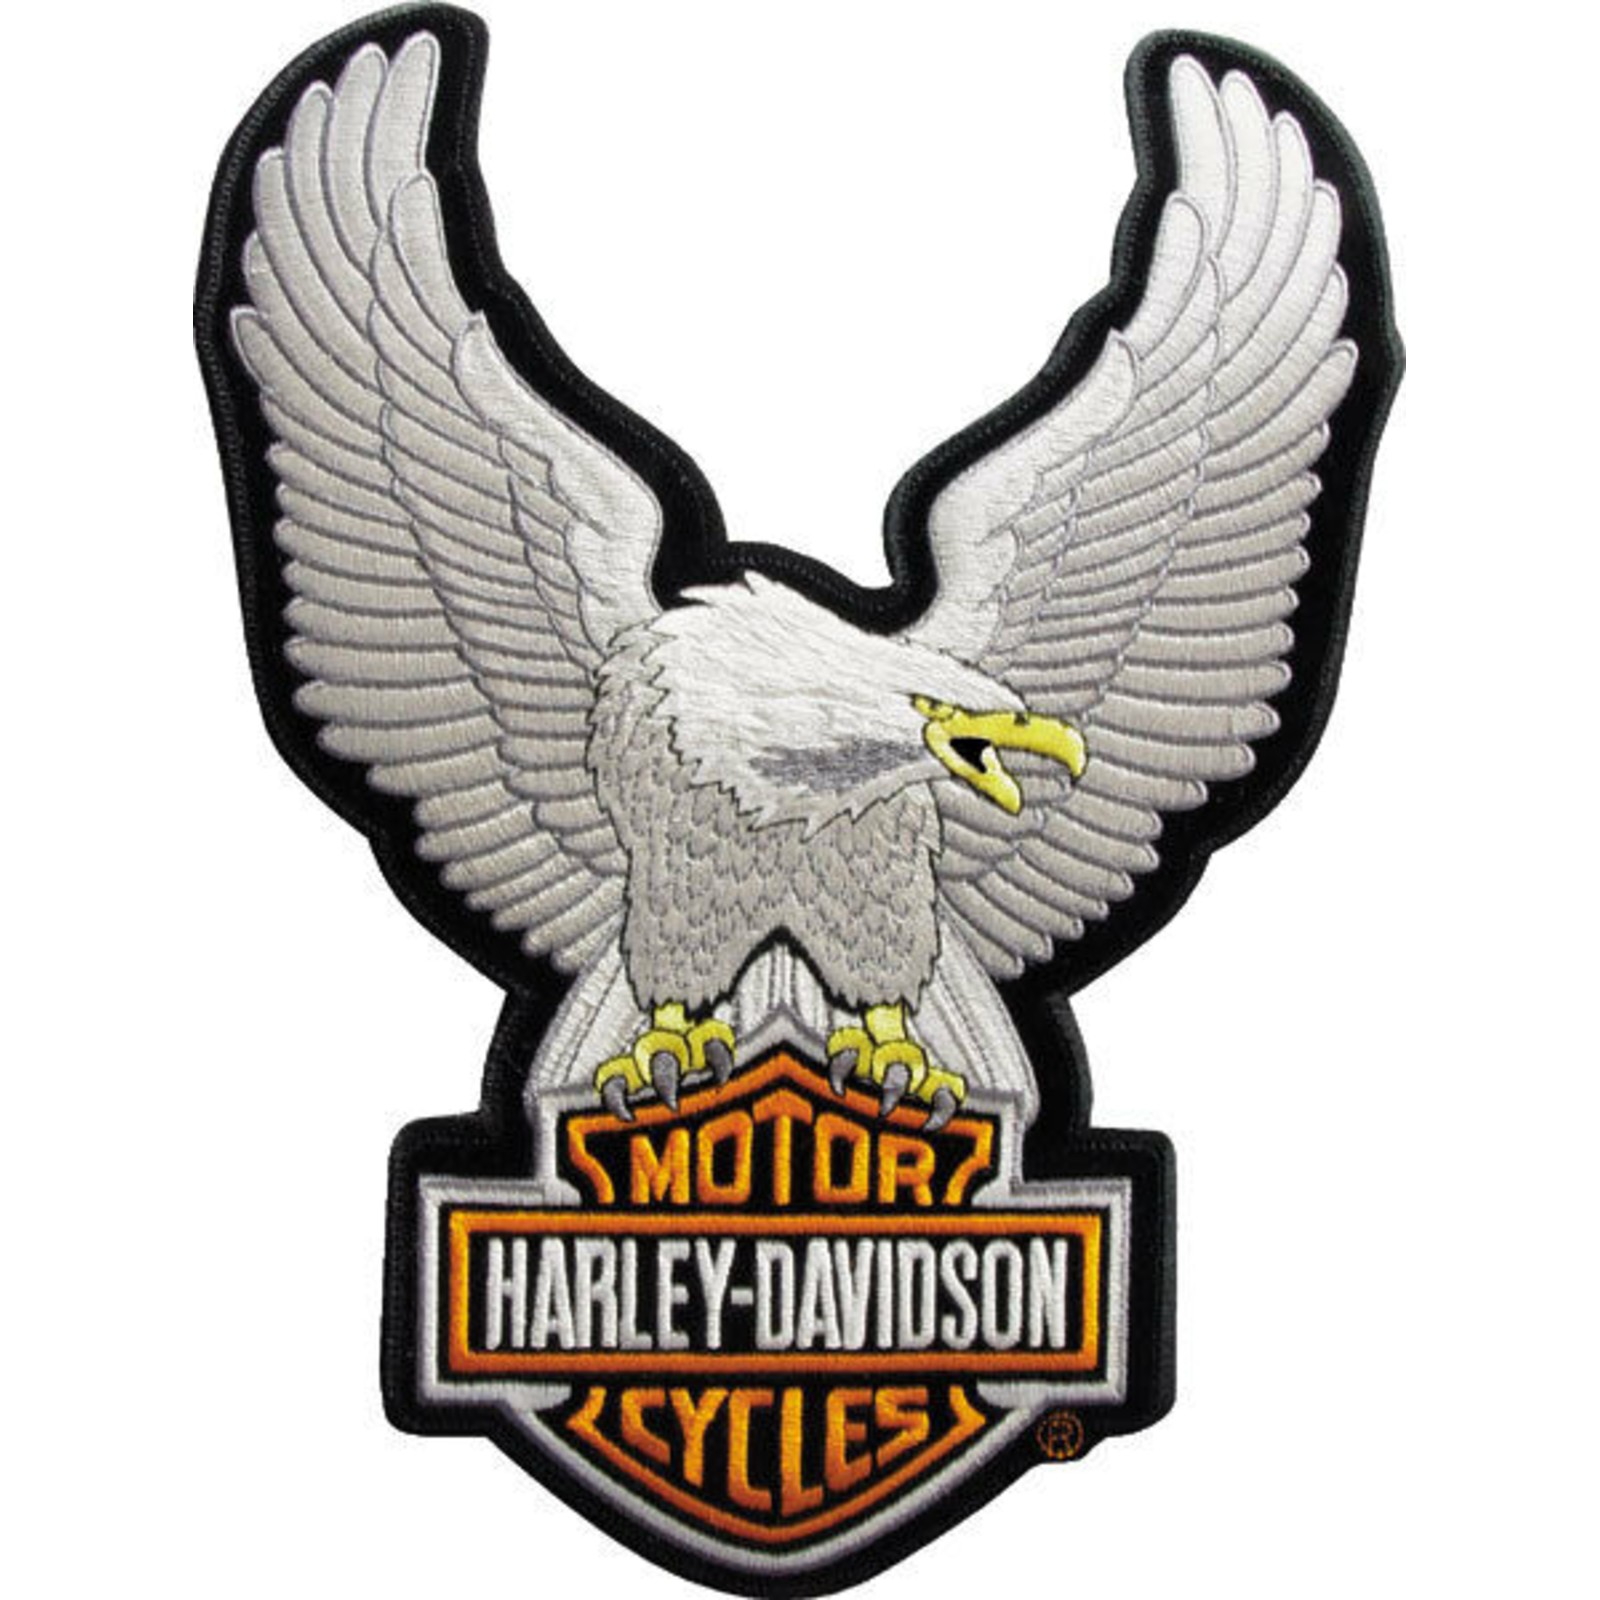 Harley Davidson Patch Emblem Upwing Eagle Silver Patch Emb328062 Small